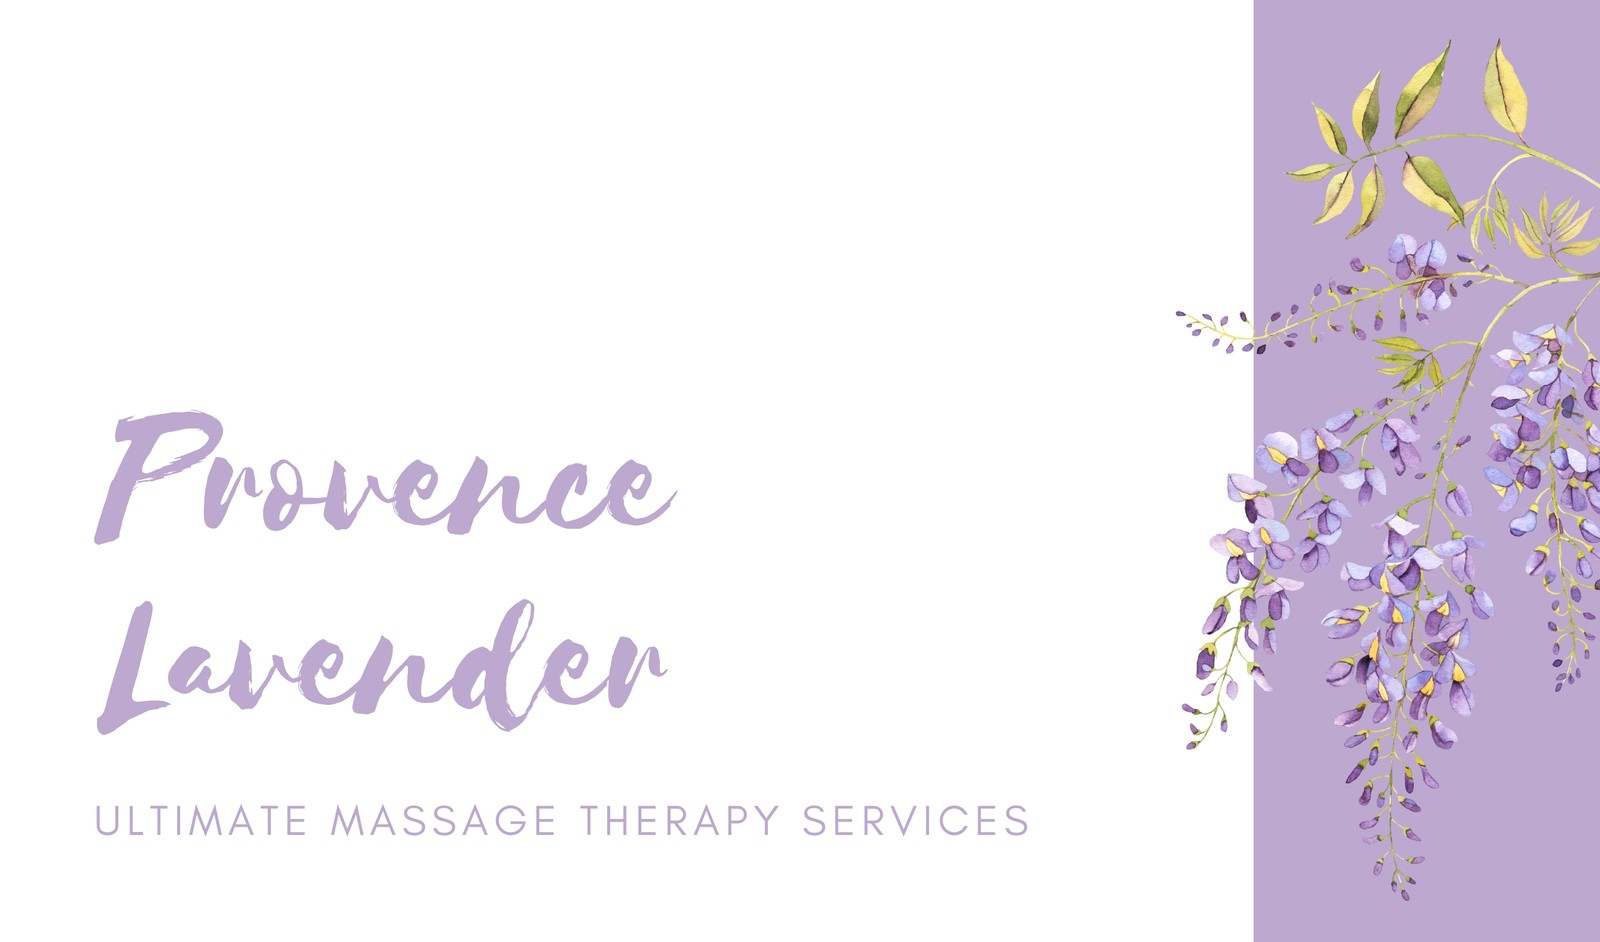 Free printable massage therapist business card templates  Canva Regarding Massage Therapy Business Card Templates